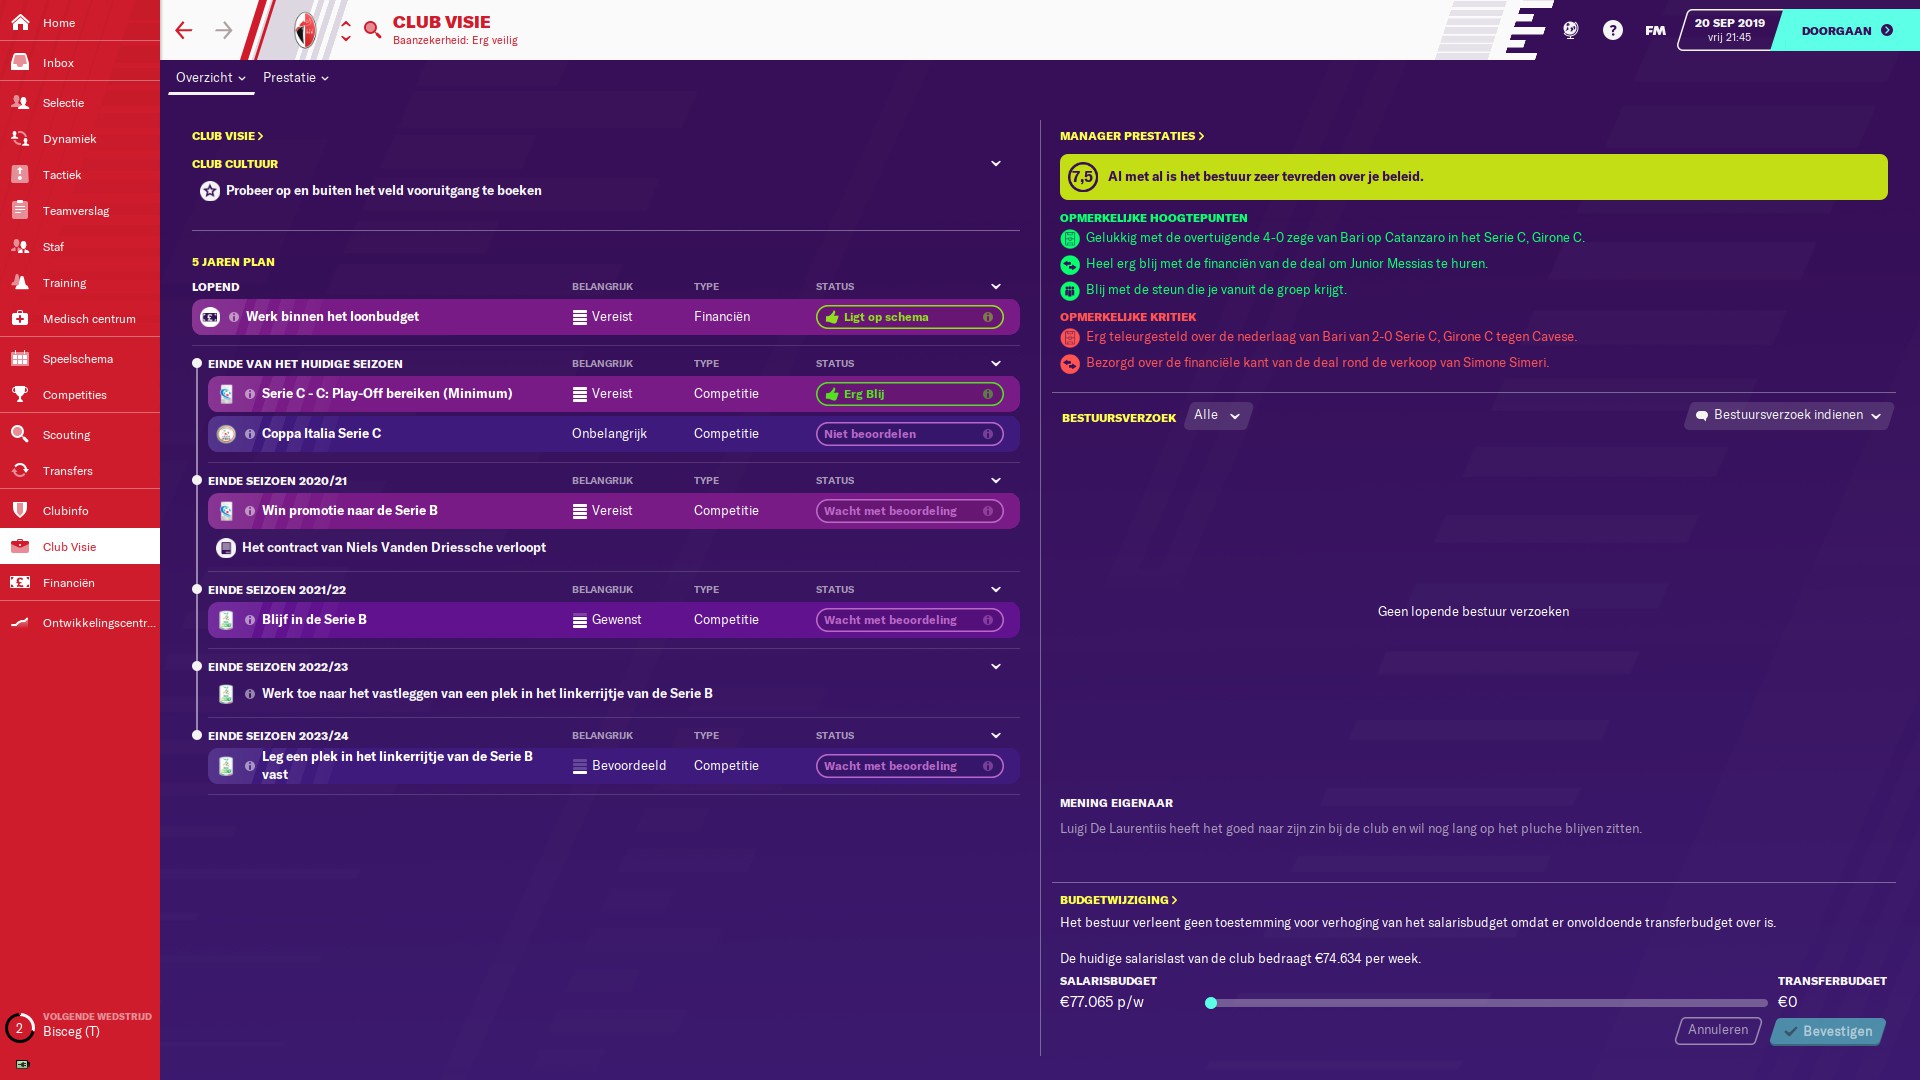 Football Manager 2020 clubvisie